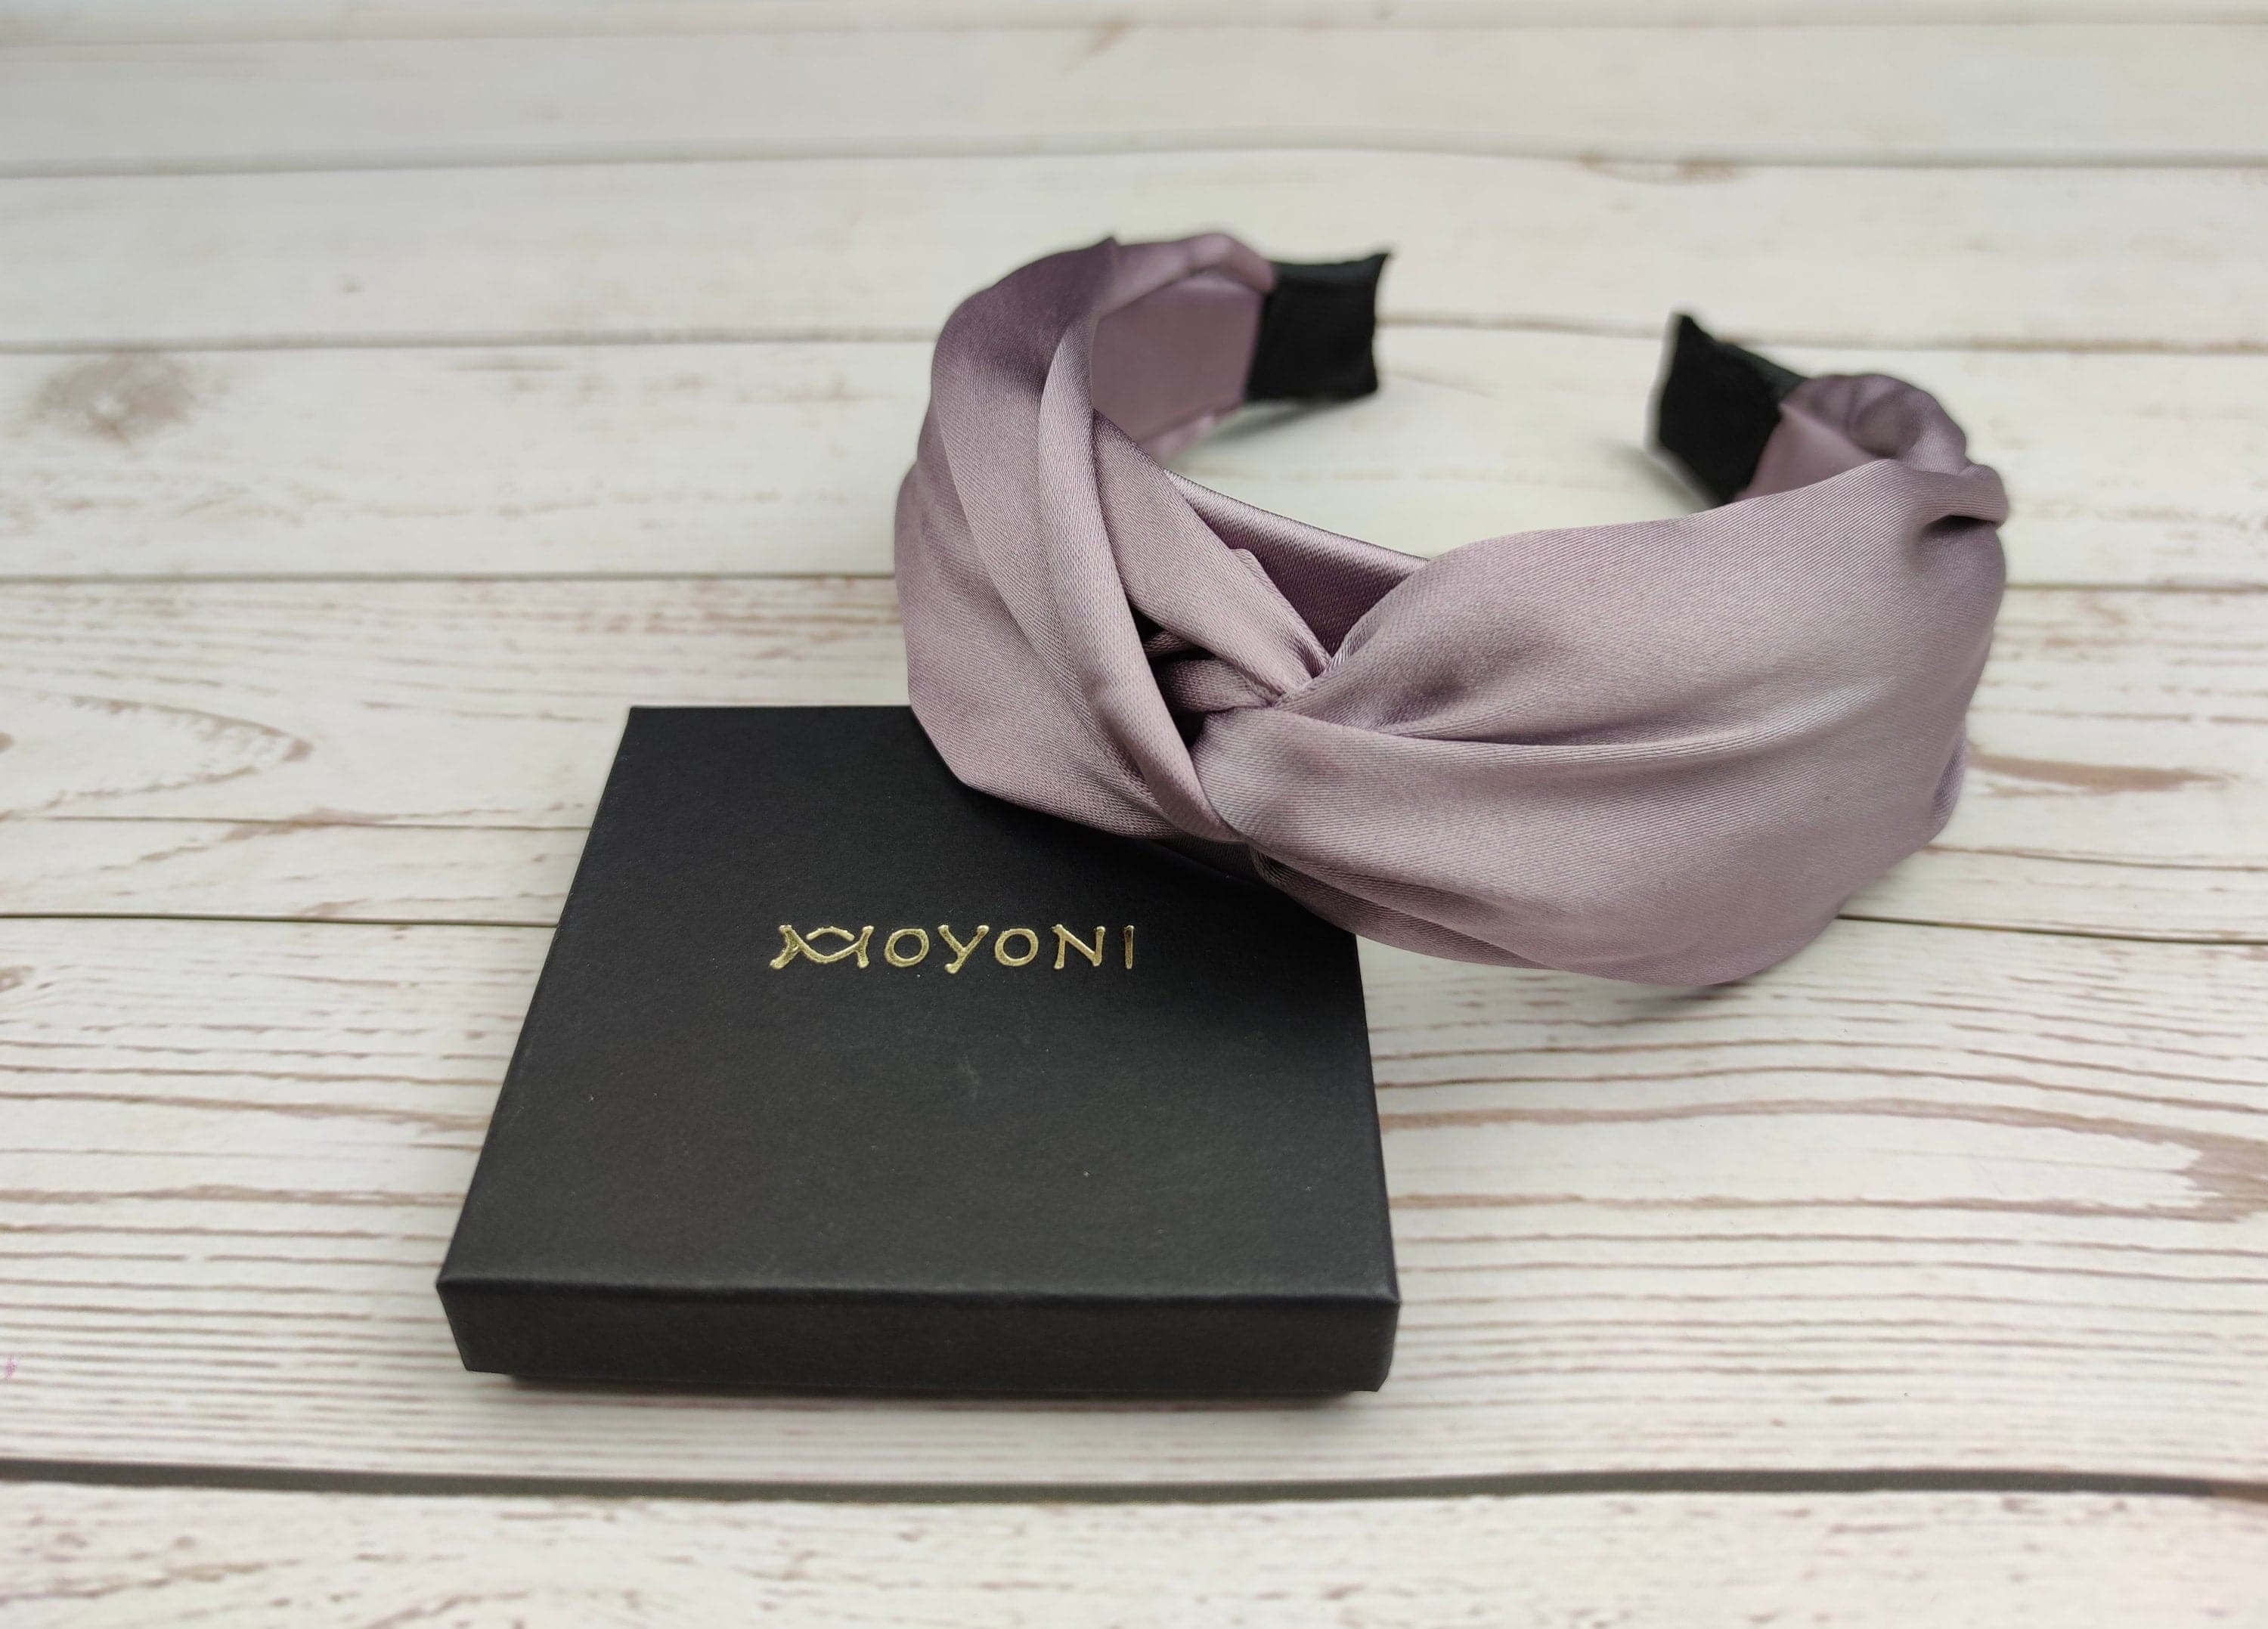 Lilac Satin Knotted Headband: A stylish hair accessory for women, made of high-quality satin fabric in a beautiful light designer color.